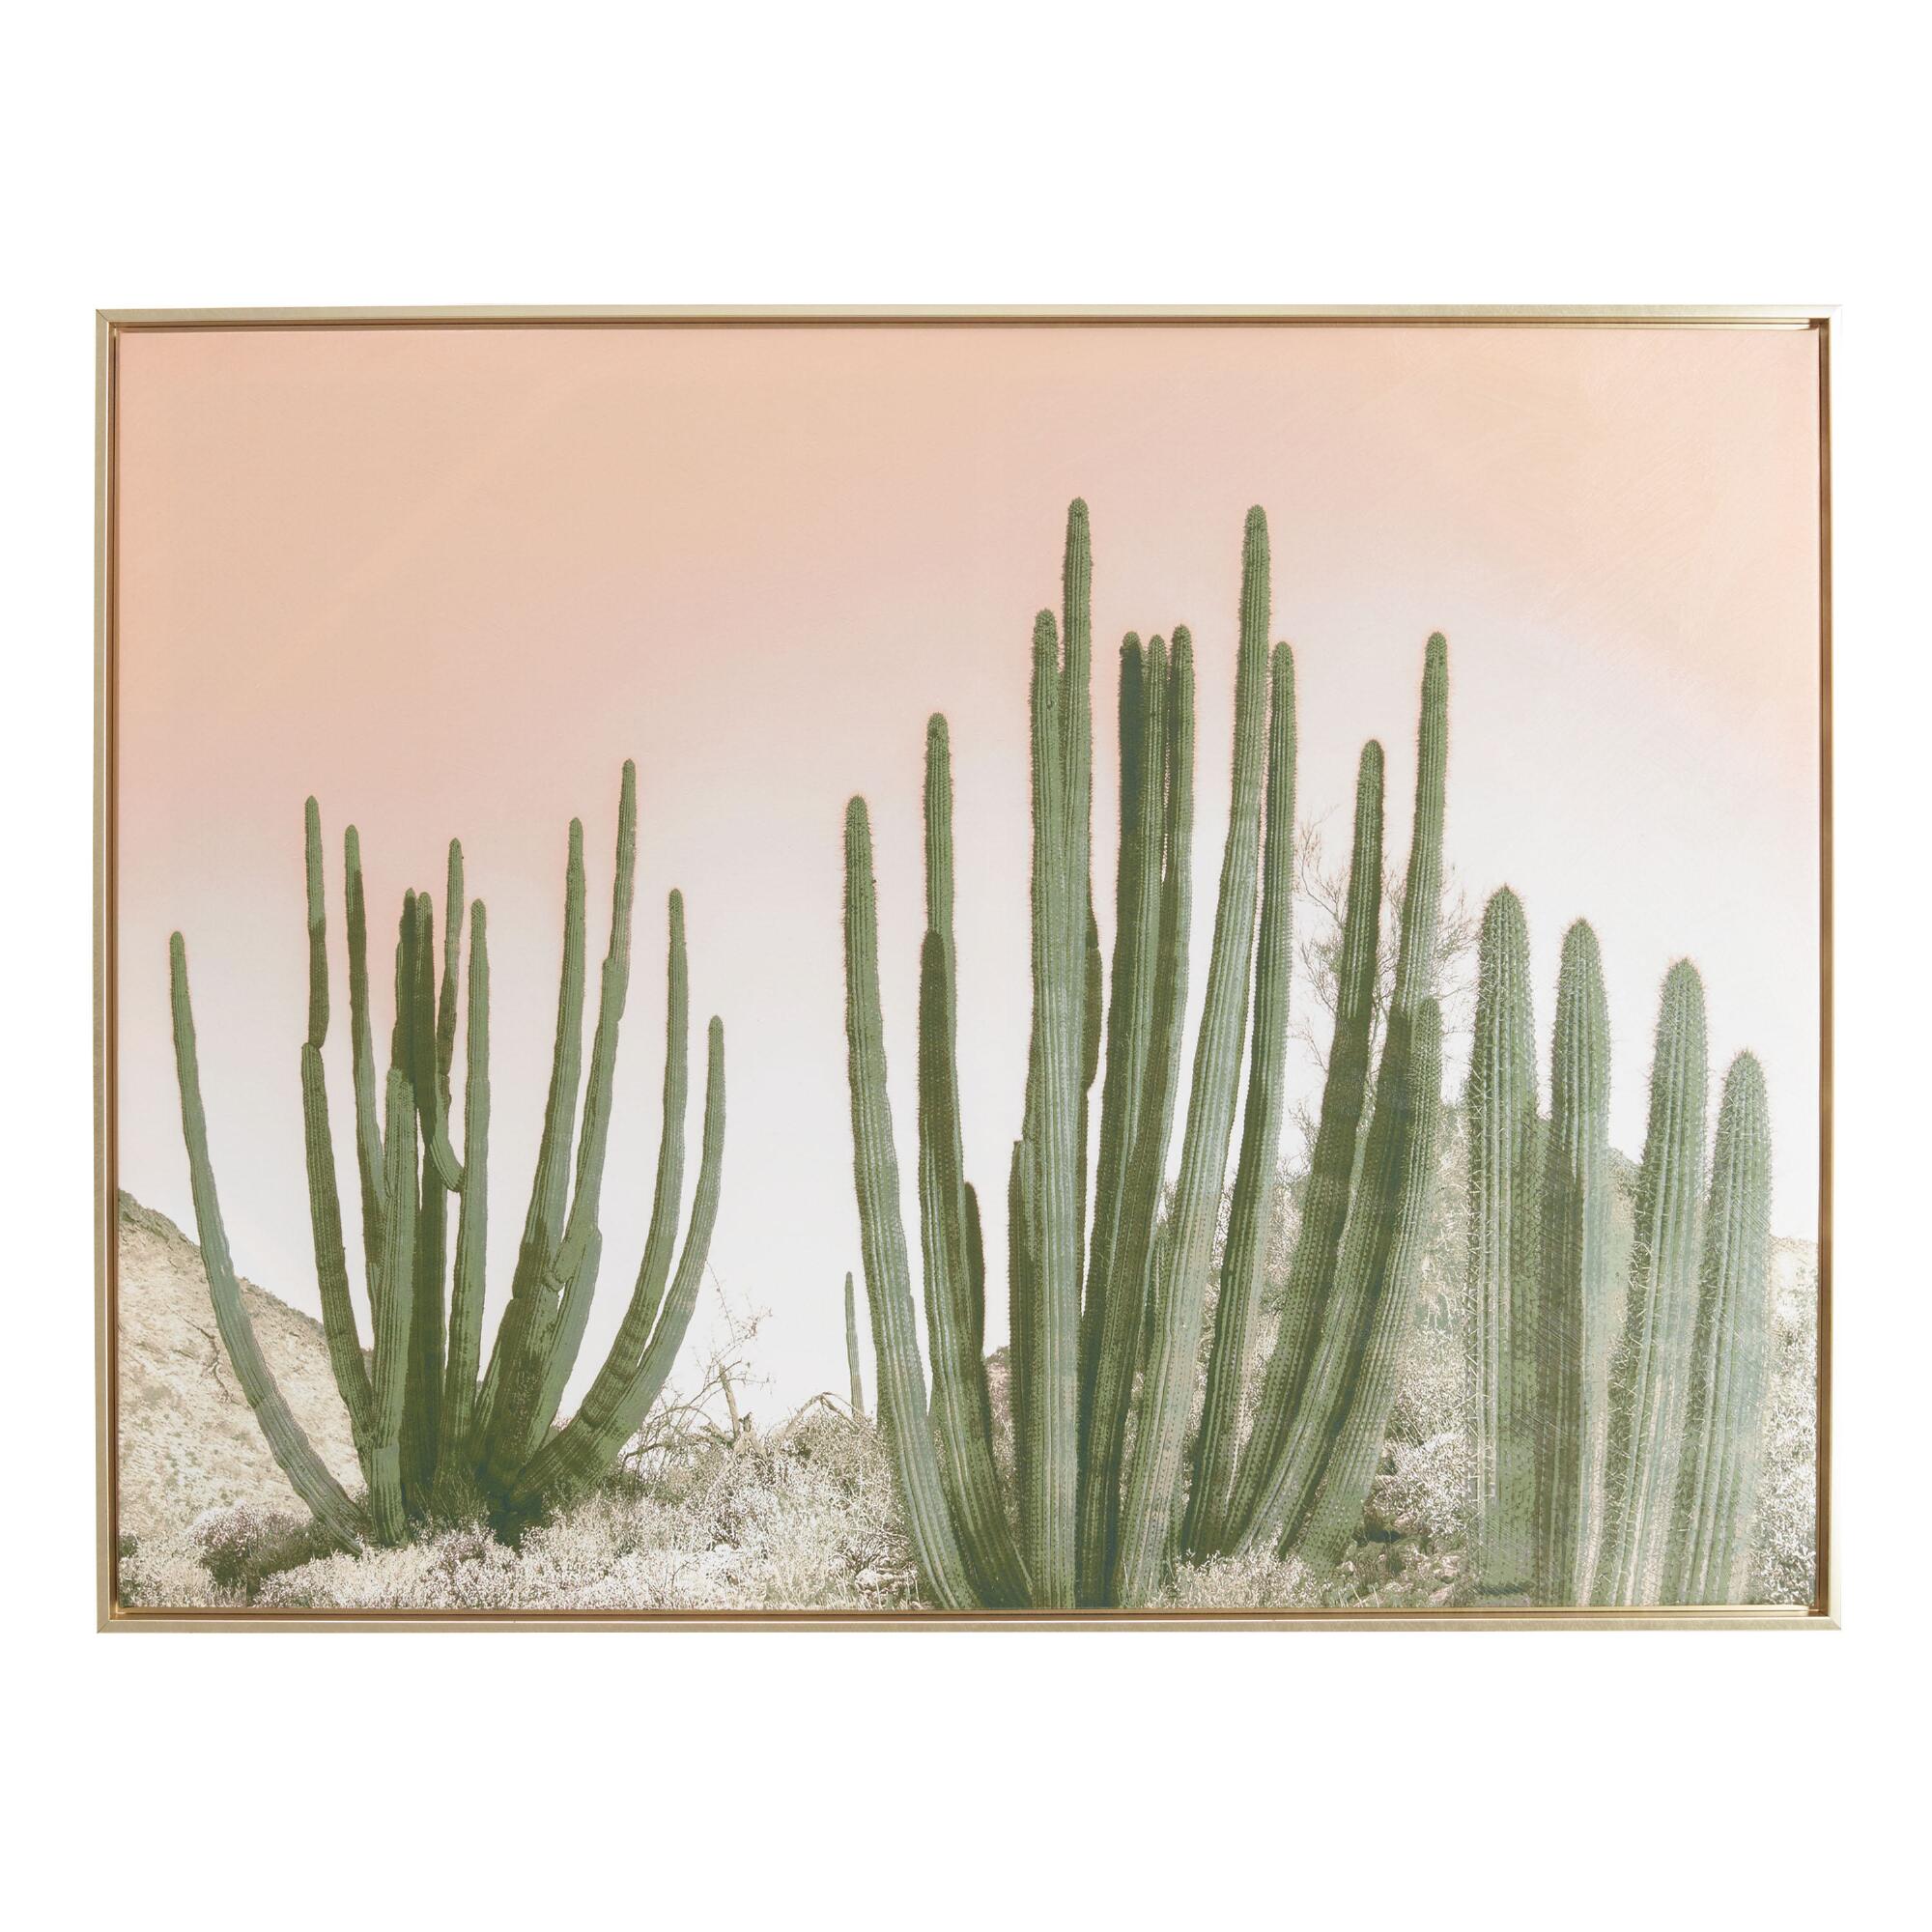 Organ Pipe Cactus Framed Canvas Wall Art: Pink/Multi/Gold - Large by World Market